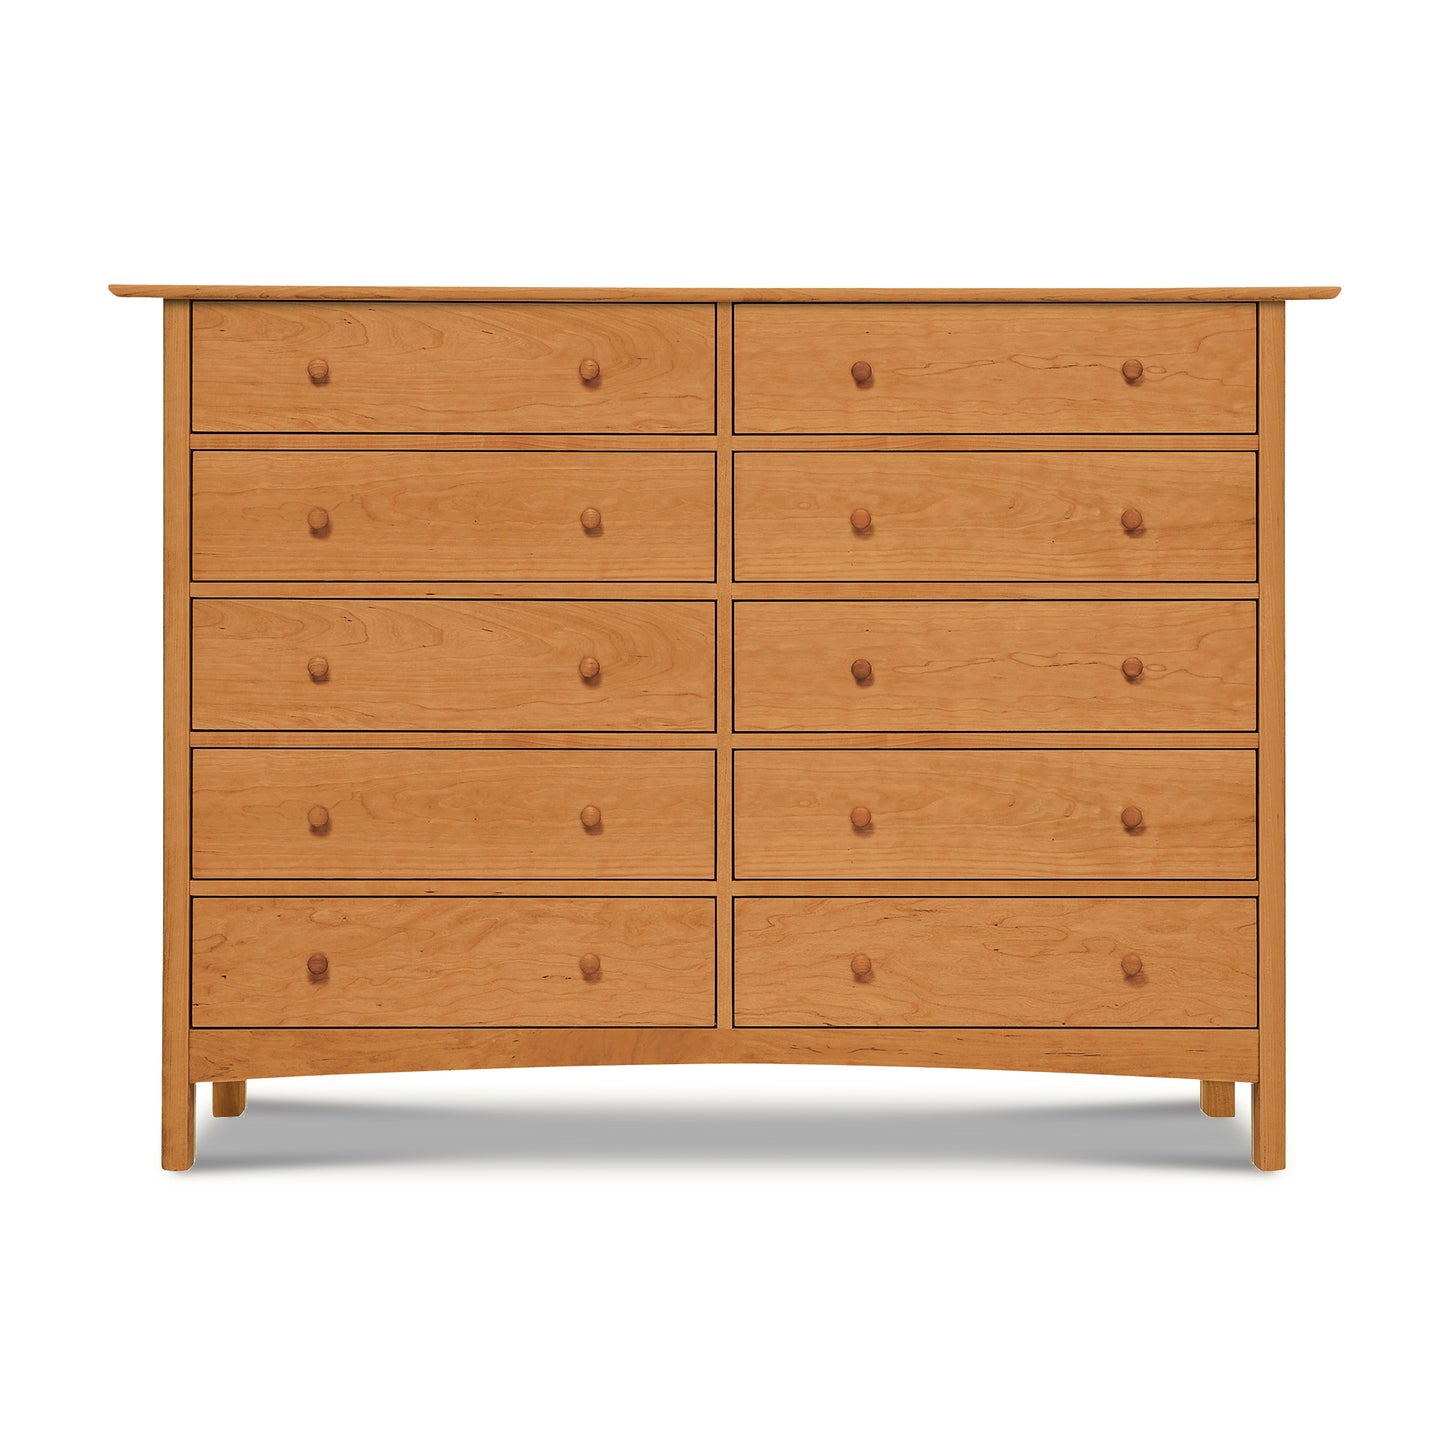 A Heartwood Shaker 10-Drawer Dresser from the Vermont Furniture Designs Modern Shaker Furniture Collection, featuring a simple design and round knobs, isolated on a white background.